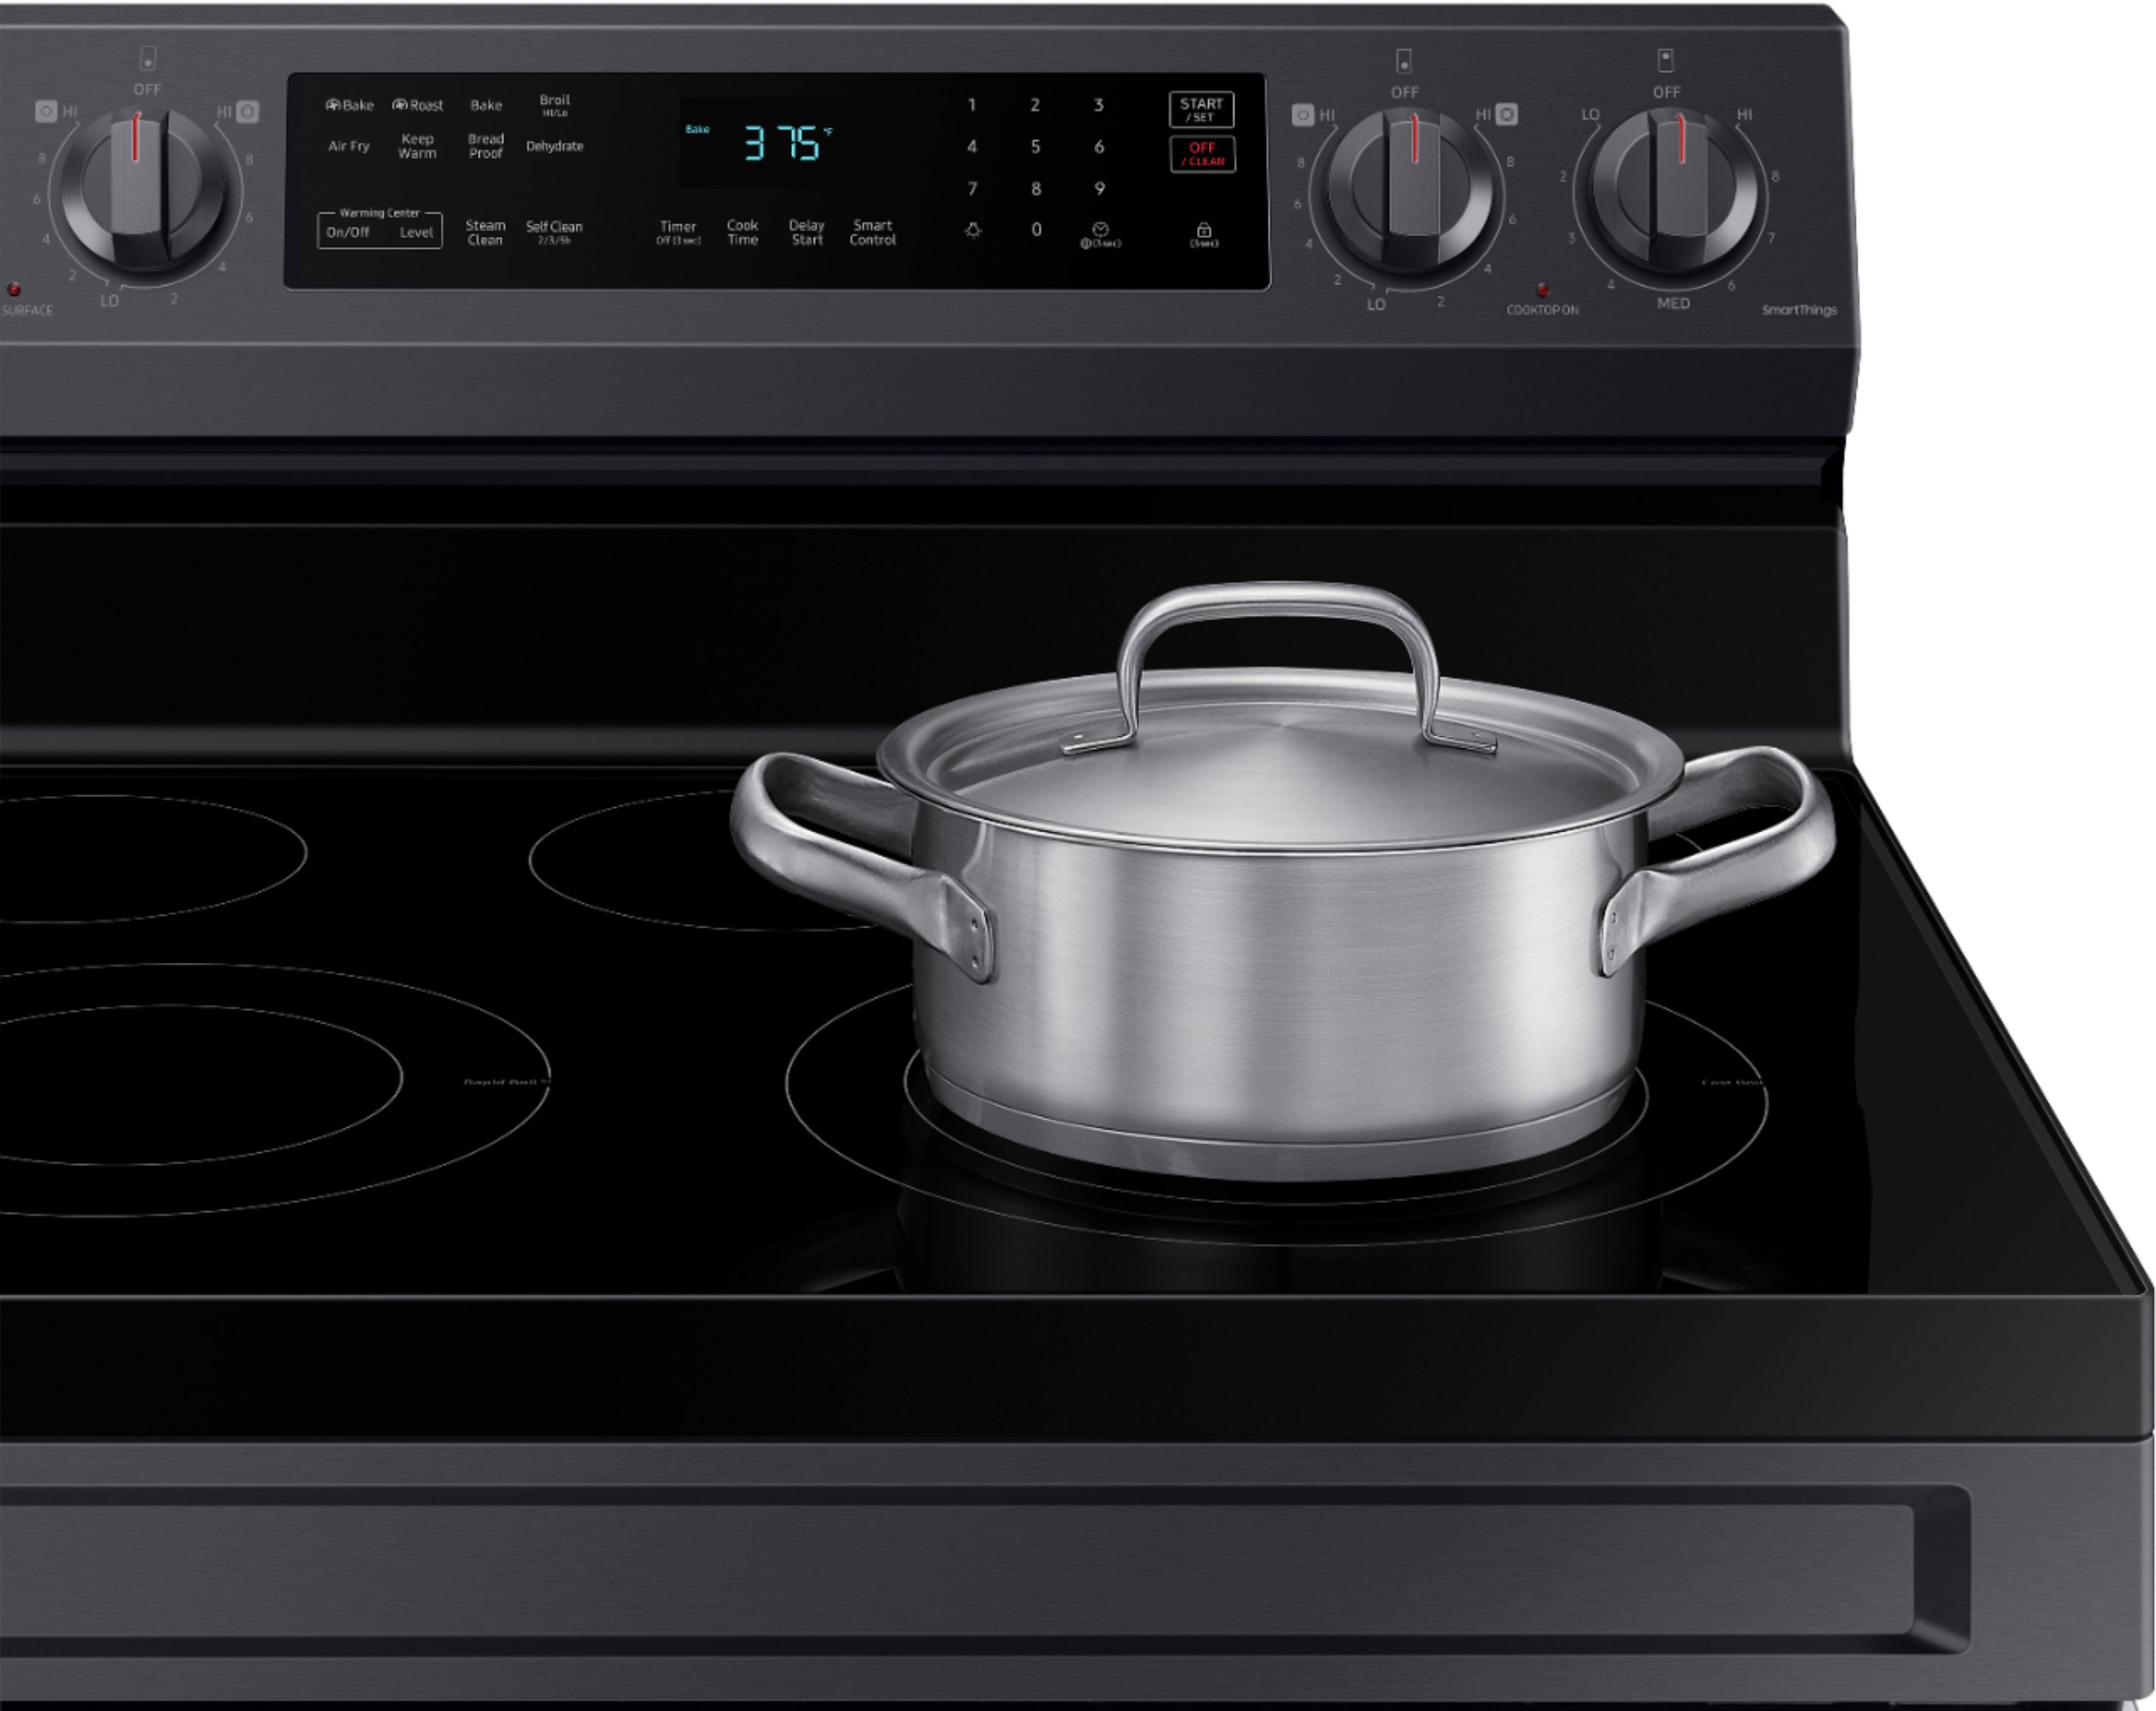 Samsung 6.3 Cu. Ft. Freestanding Electric Range with 5 Burners in